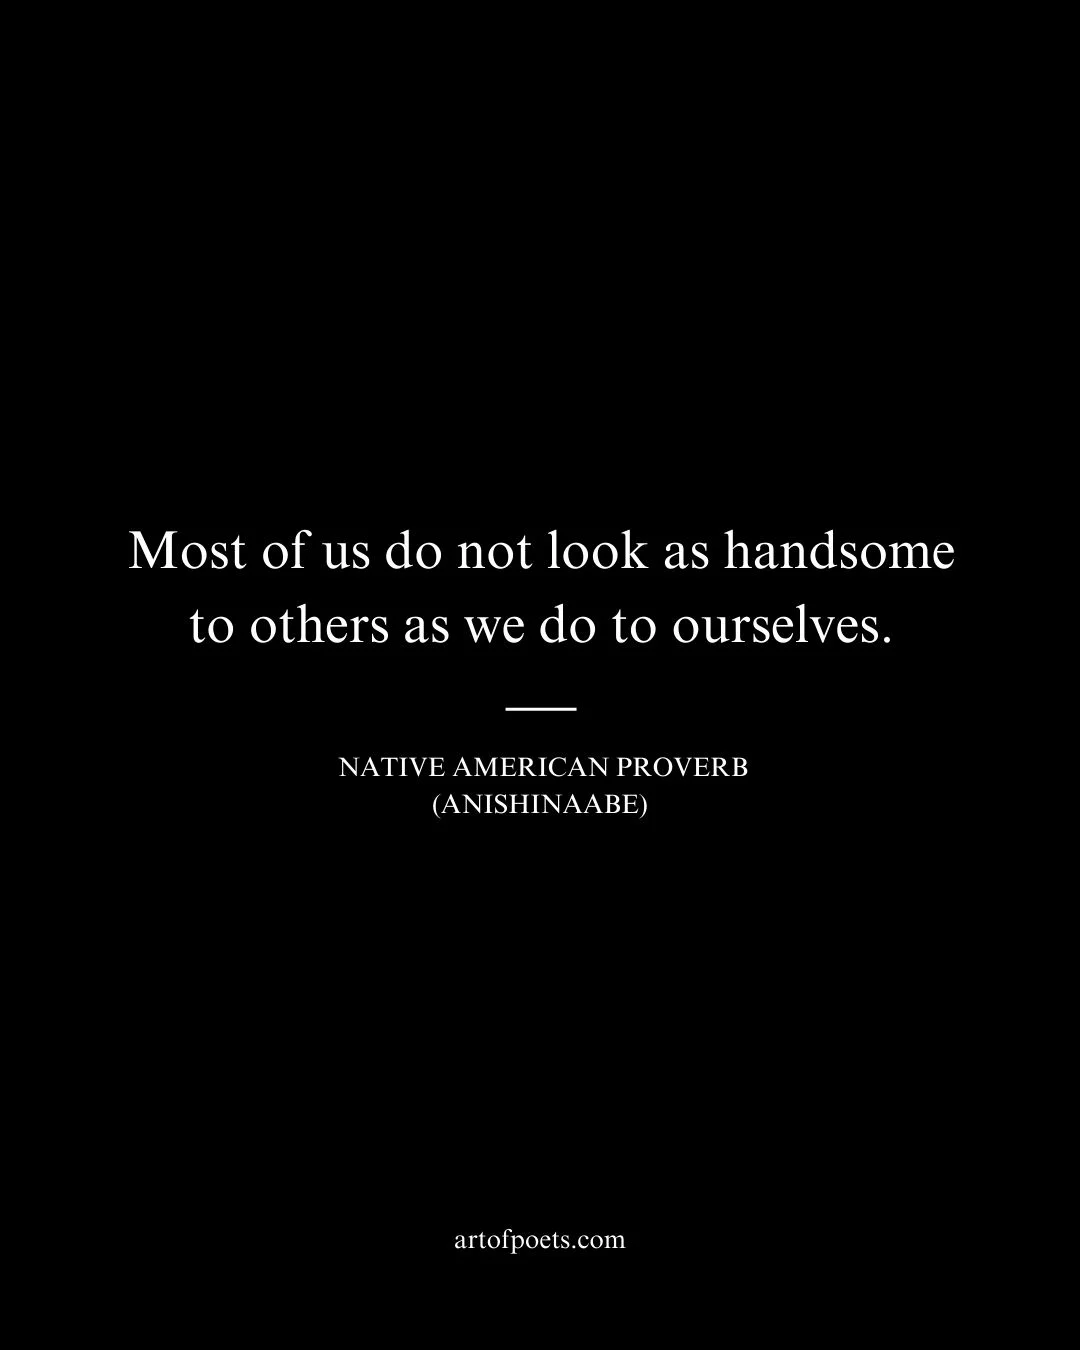 Most of us do not look as handsome to others as we do to ourselves